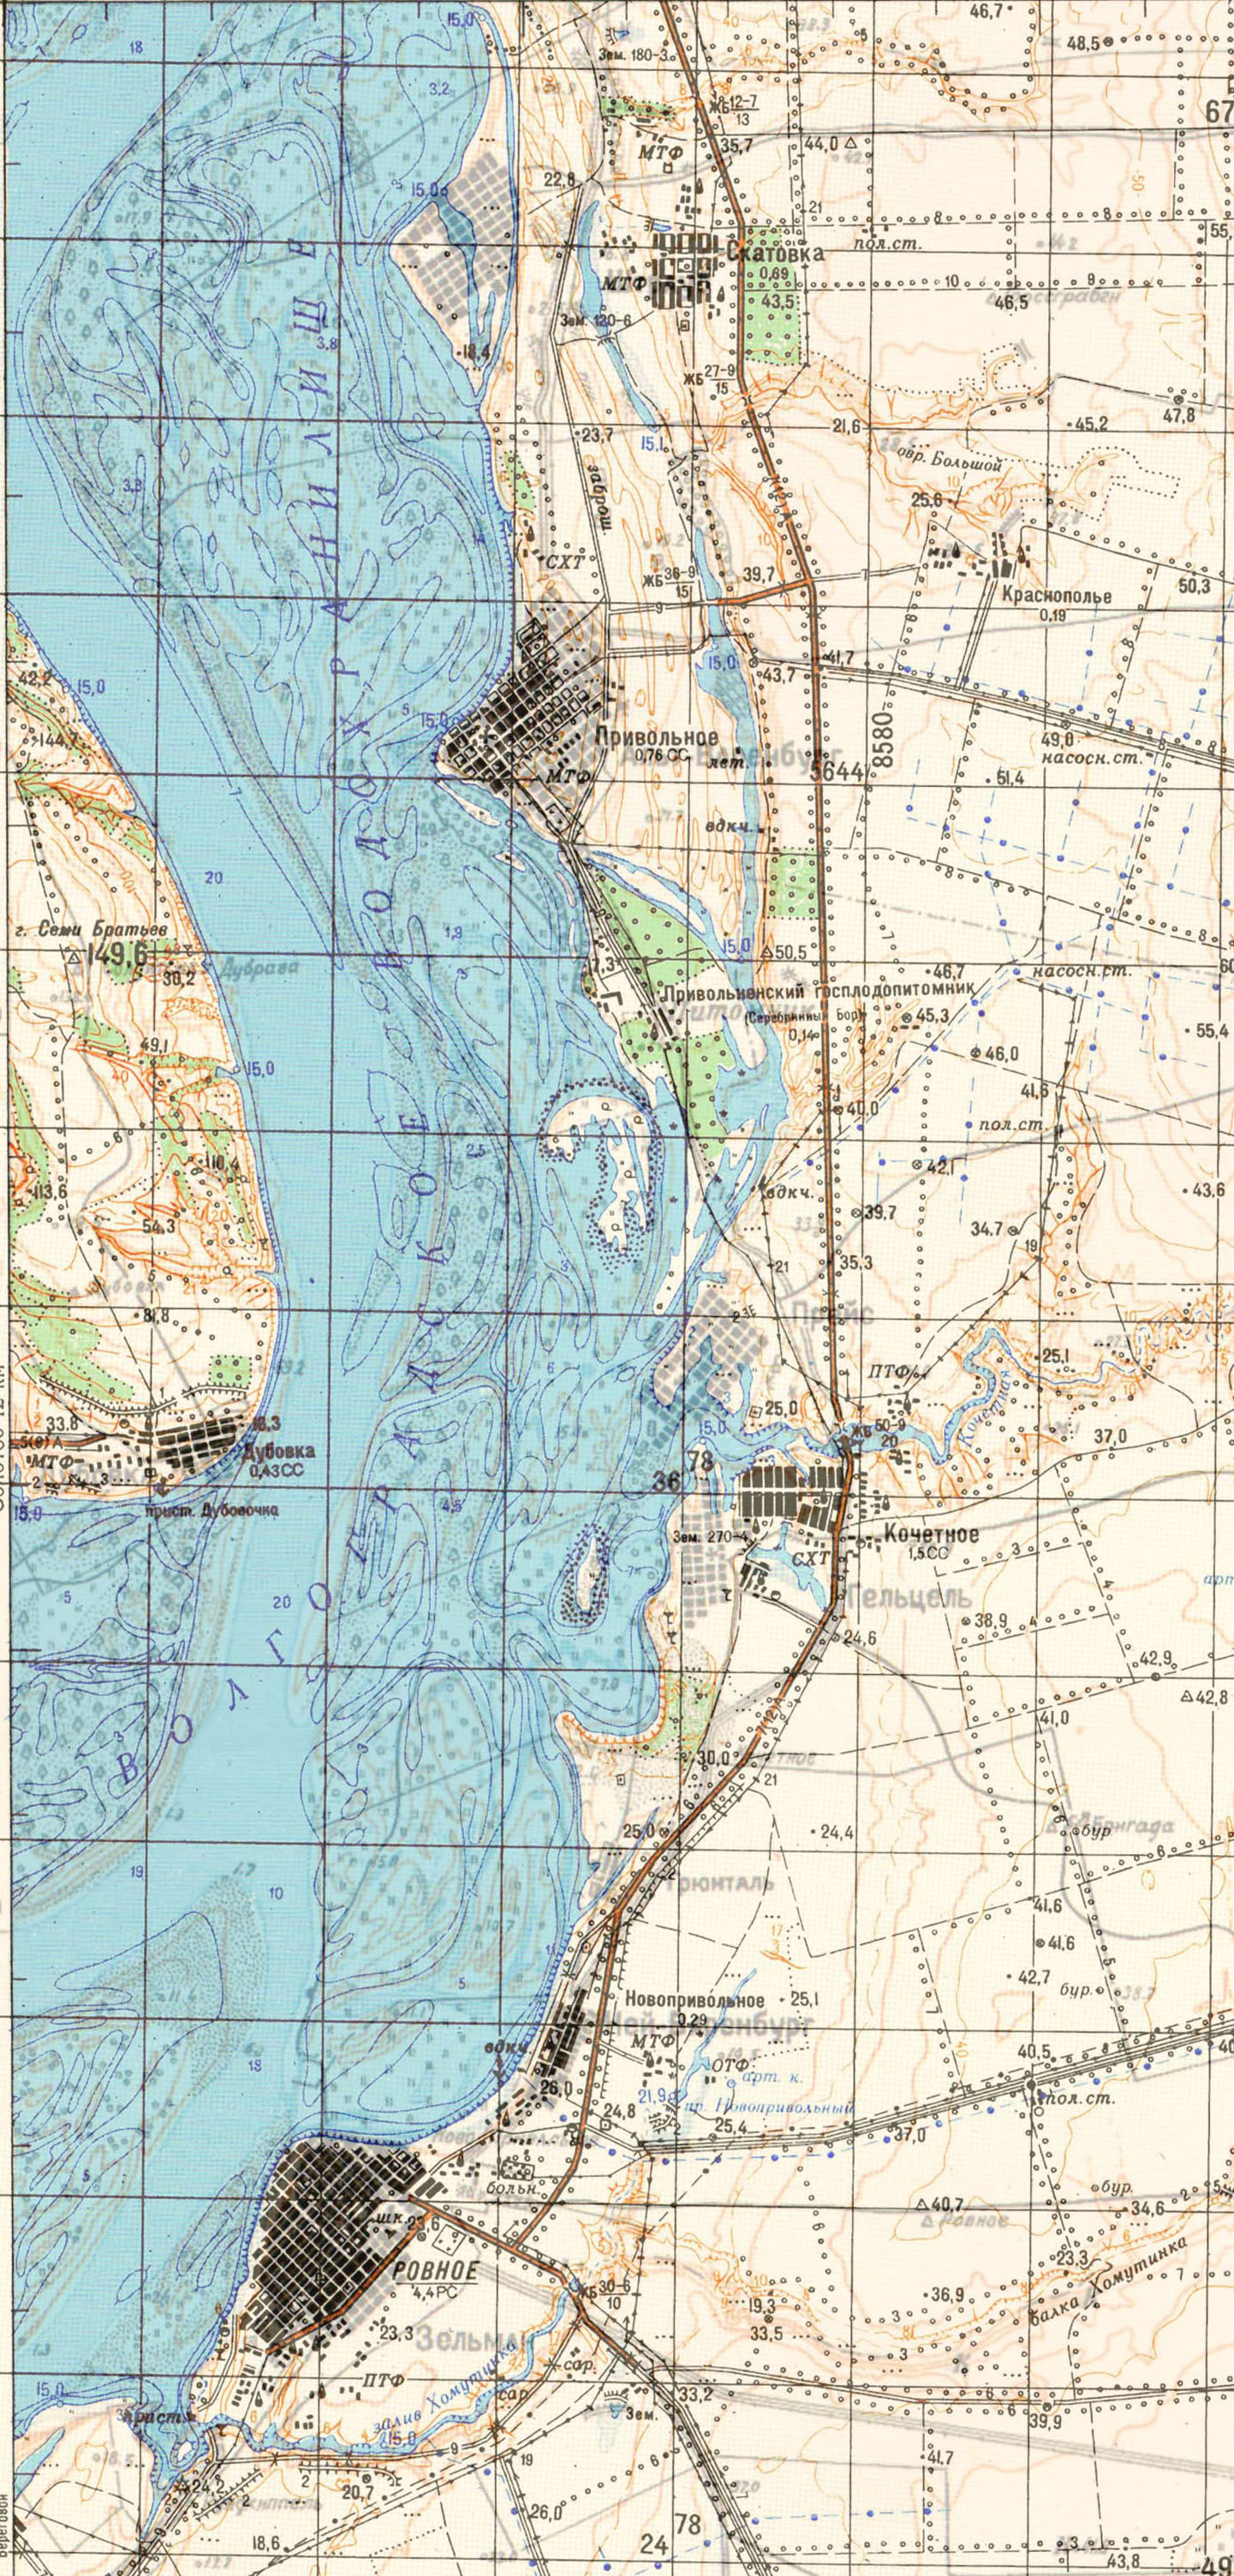 This map overlays several maps that show the location of Neu-Warenburg (toward the bottom, just north of Seelmann) before and after the inundation of the Volga Reservoir in 1961. Source: Vladimir Kakorin.